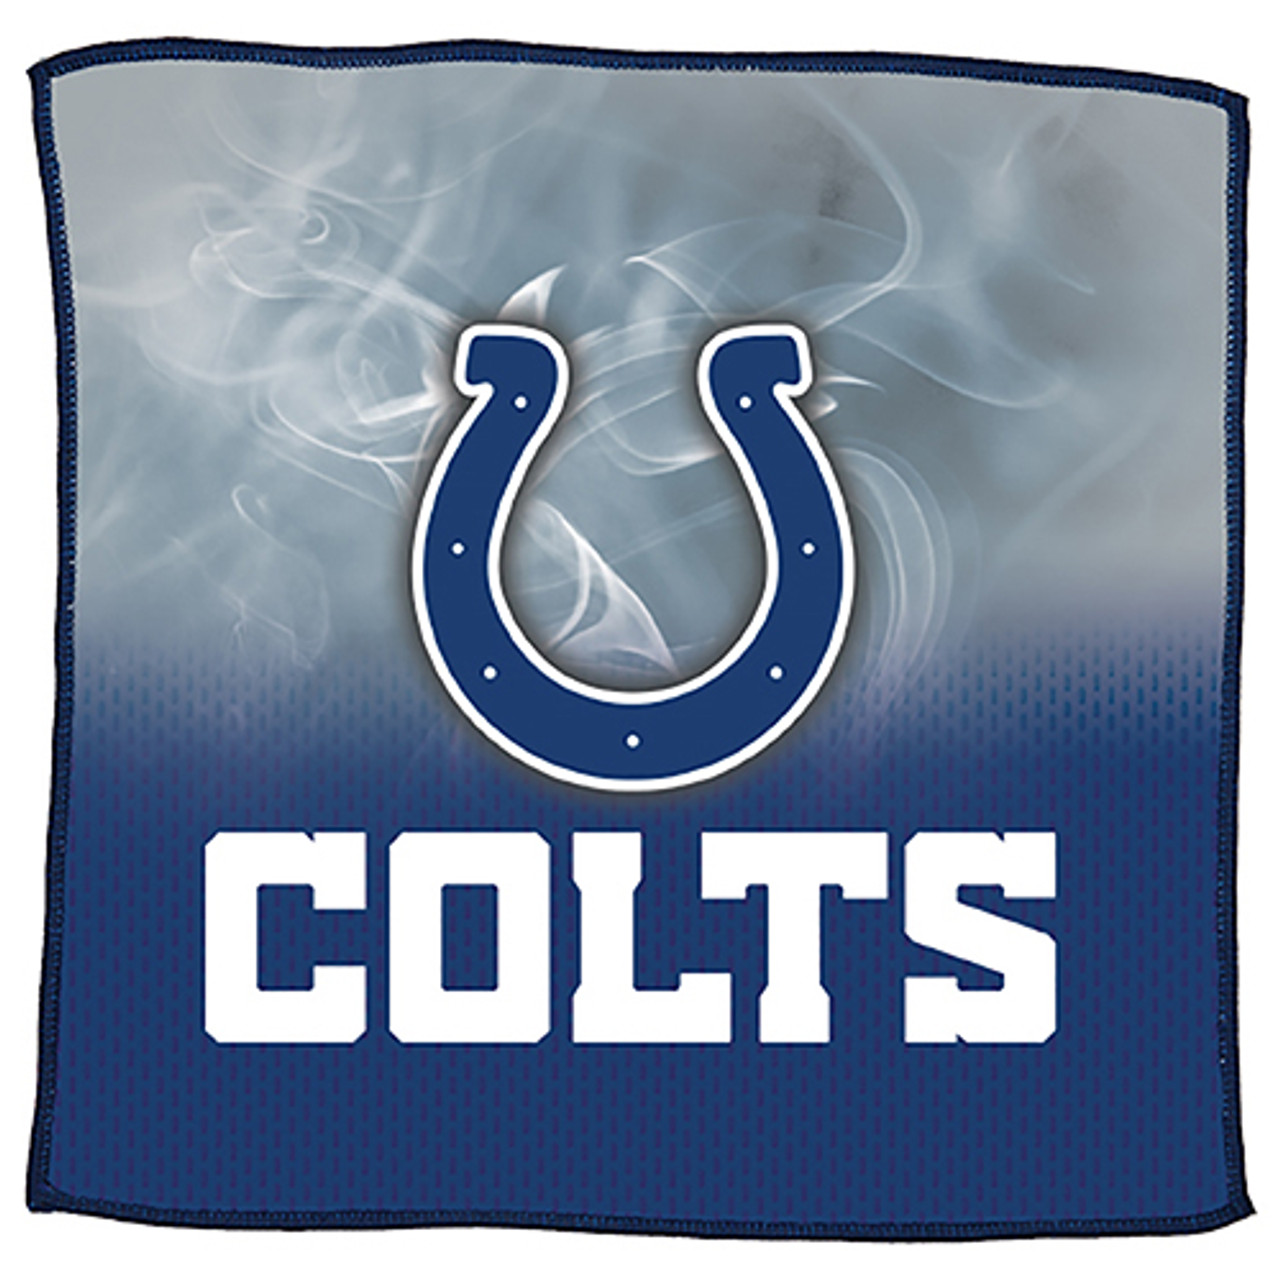 KR Strikeforce NFL on Fire Towel Indianapolis Colts